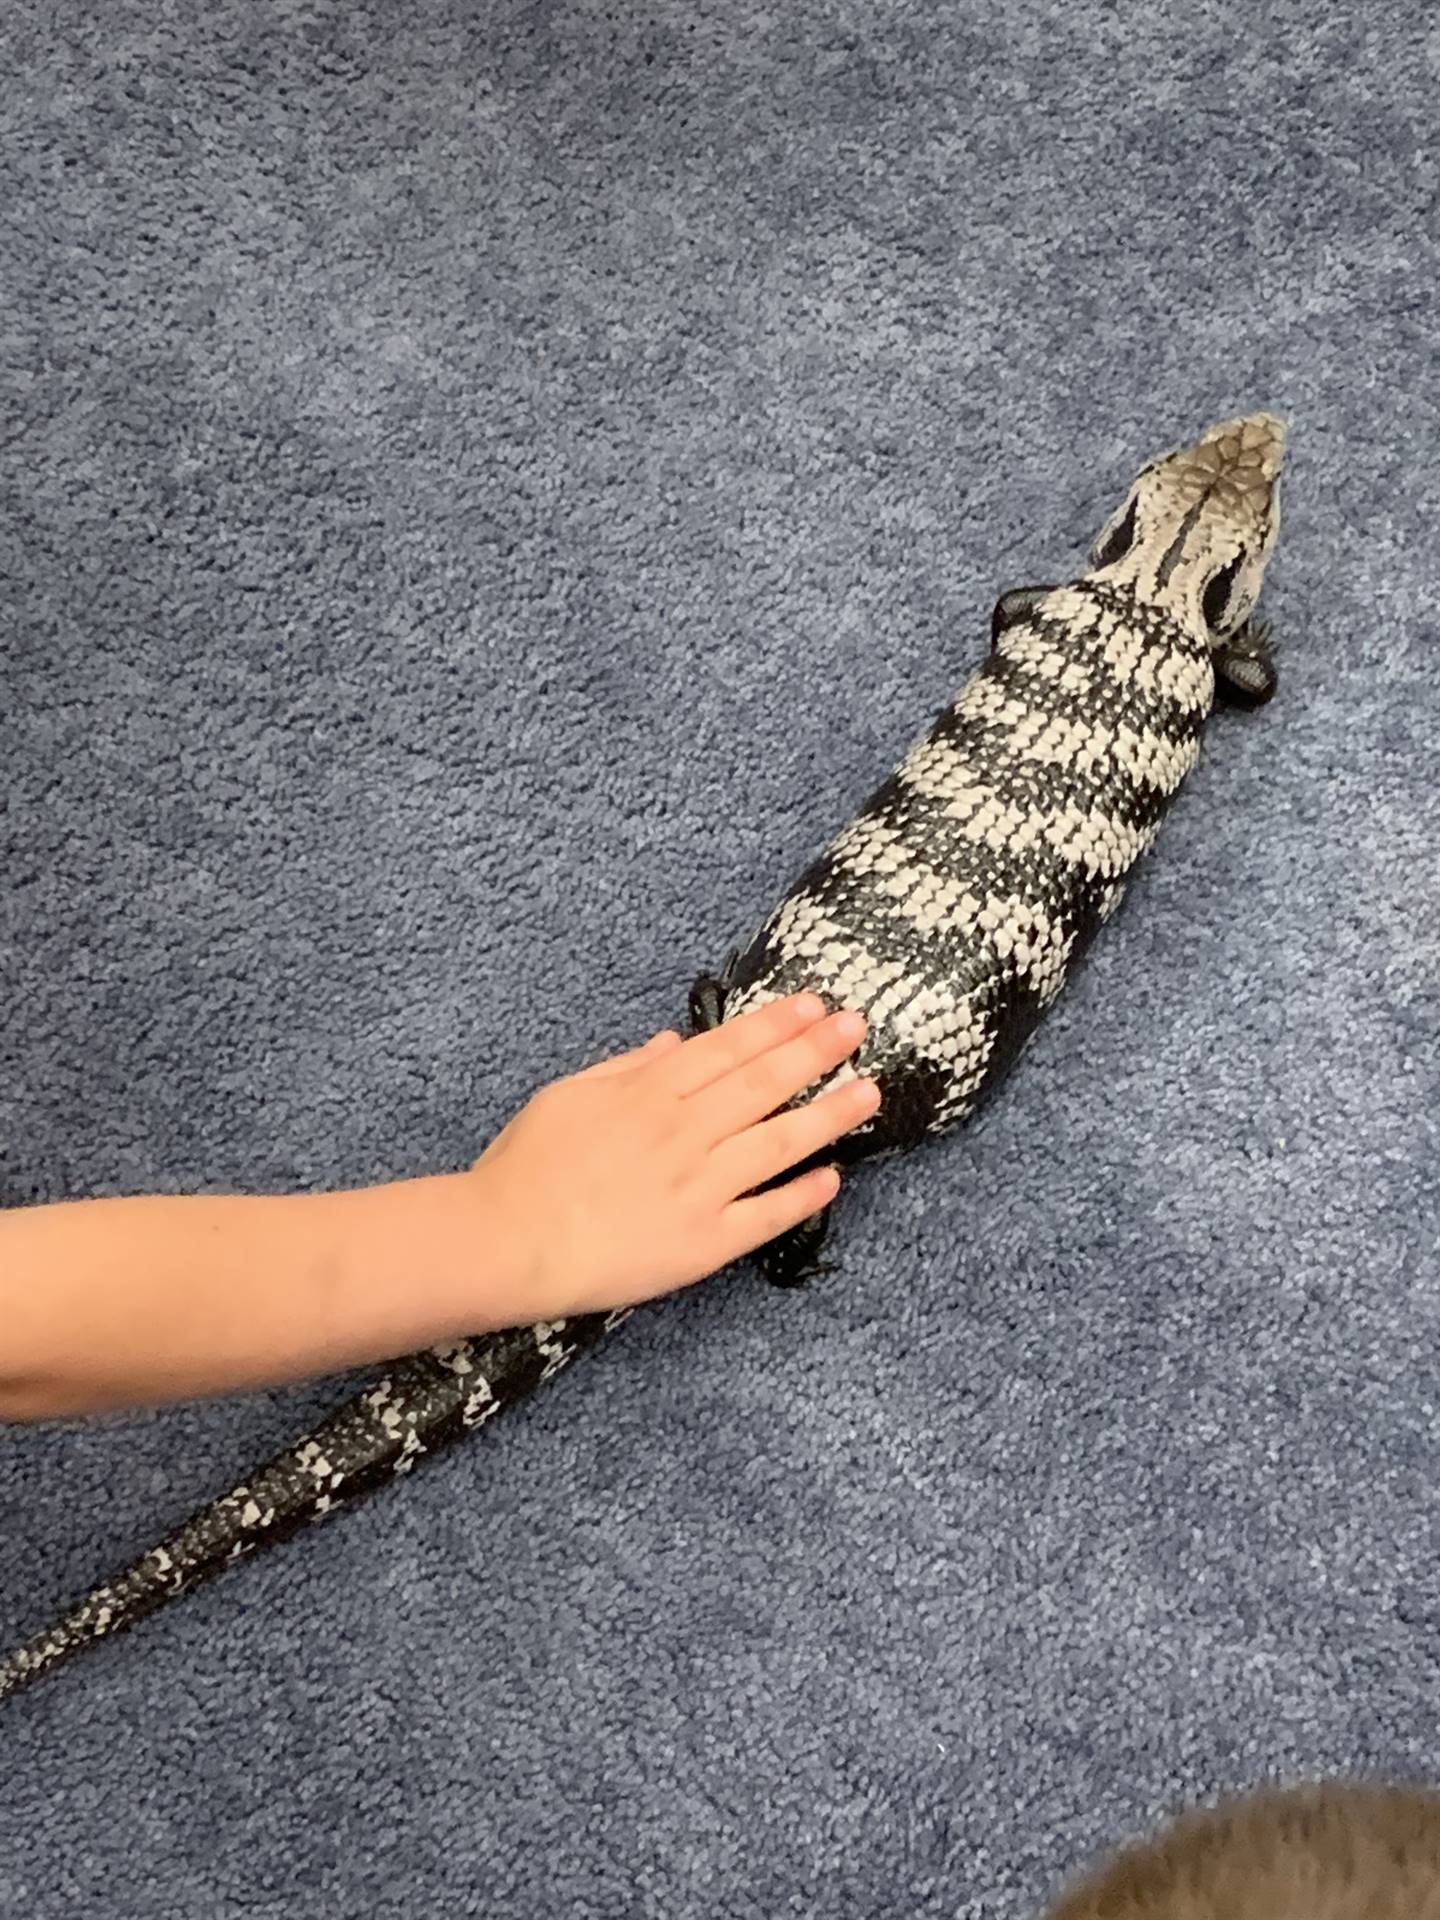 petting a blue tongued skink